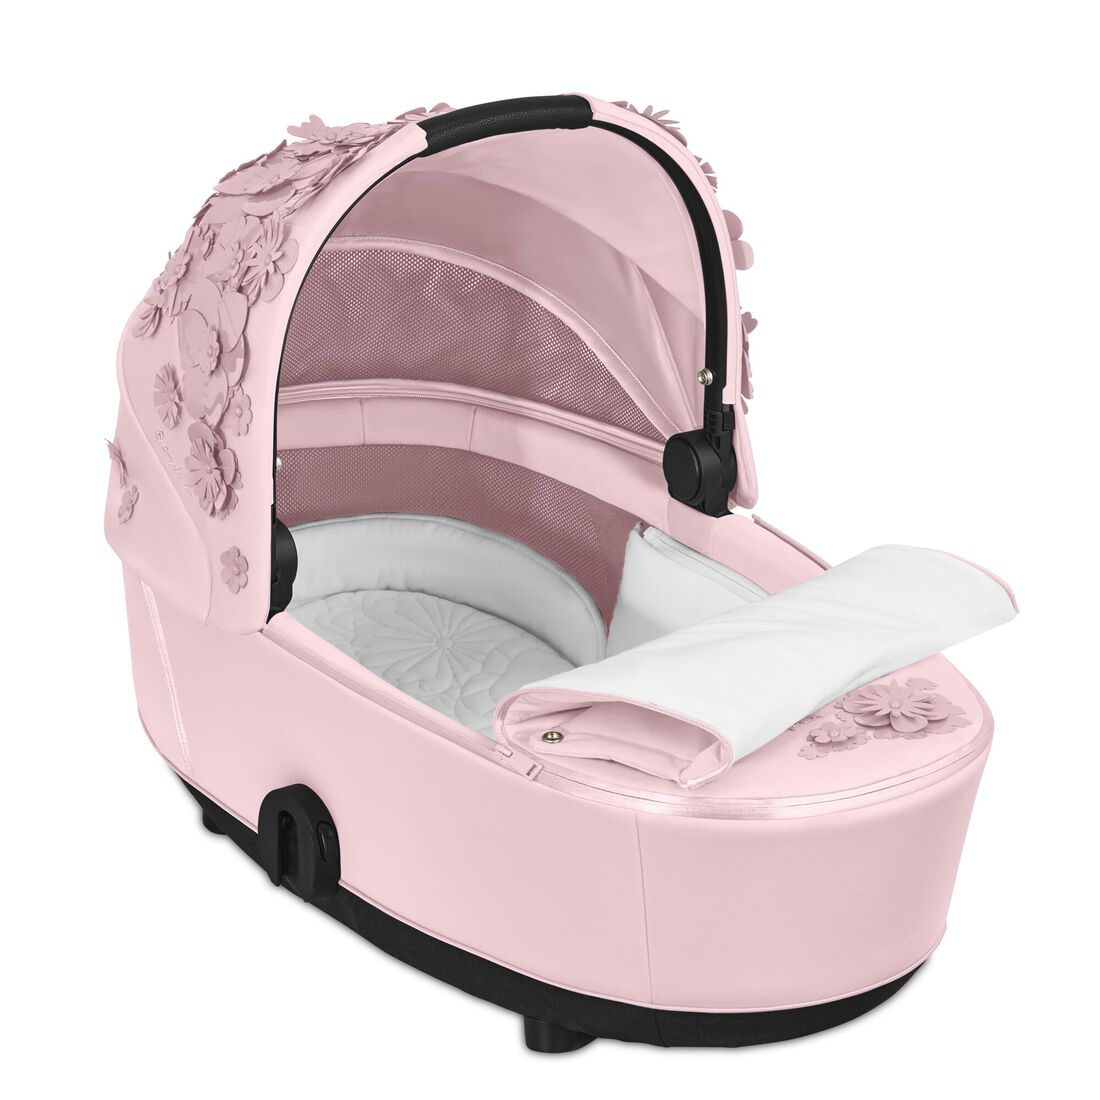 CYBEX Mios Lux Carry Cot - Pale Blush in Pale Blush large Bild 2